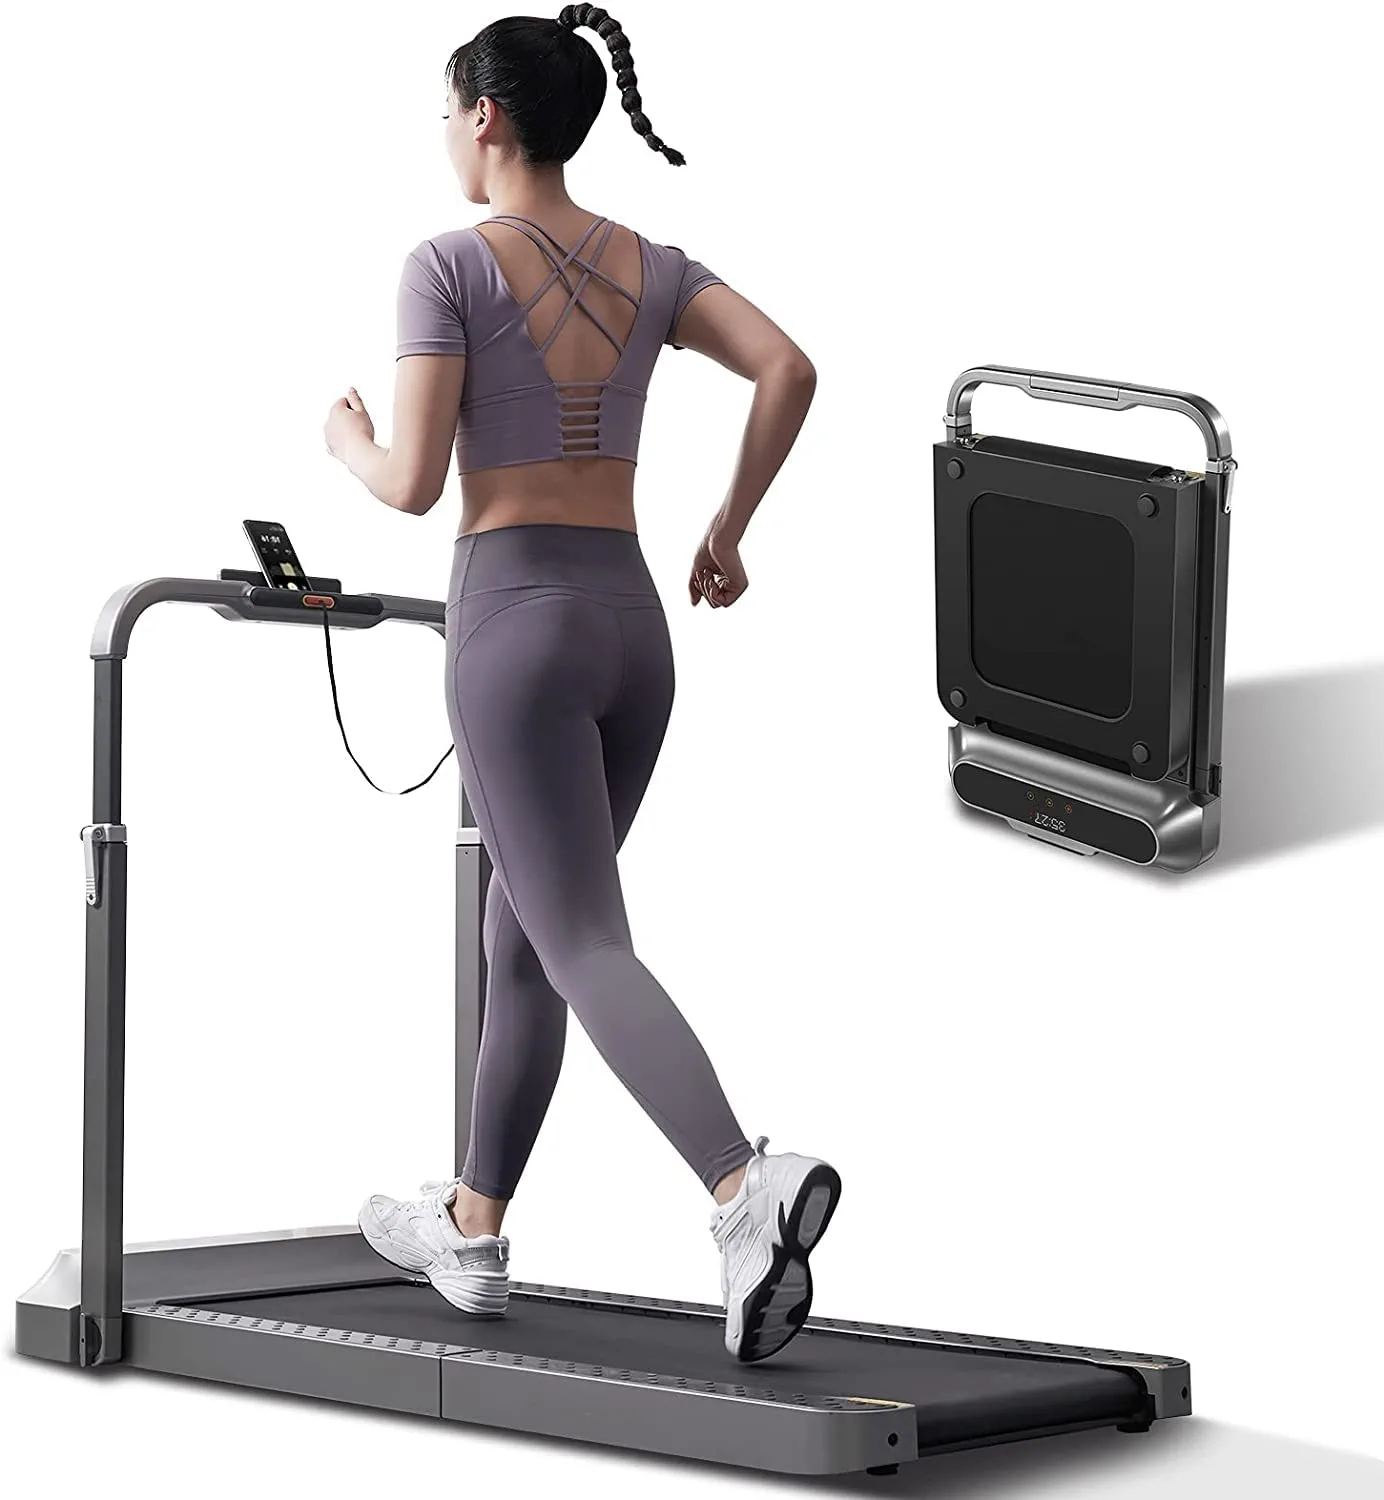 Under Desk Running and Walking Folding Easy Assembly Treadmill R2 0.3-6.2MPH, Postpartum Use is also Very Safe-Trainnox